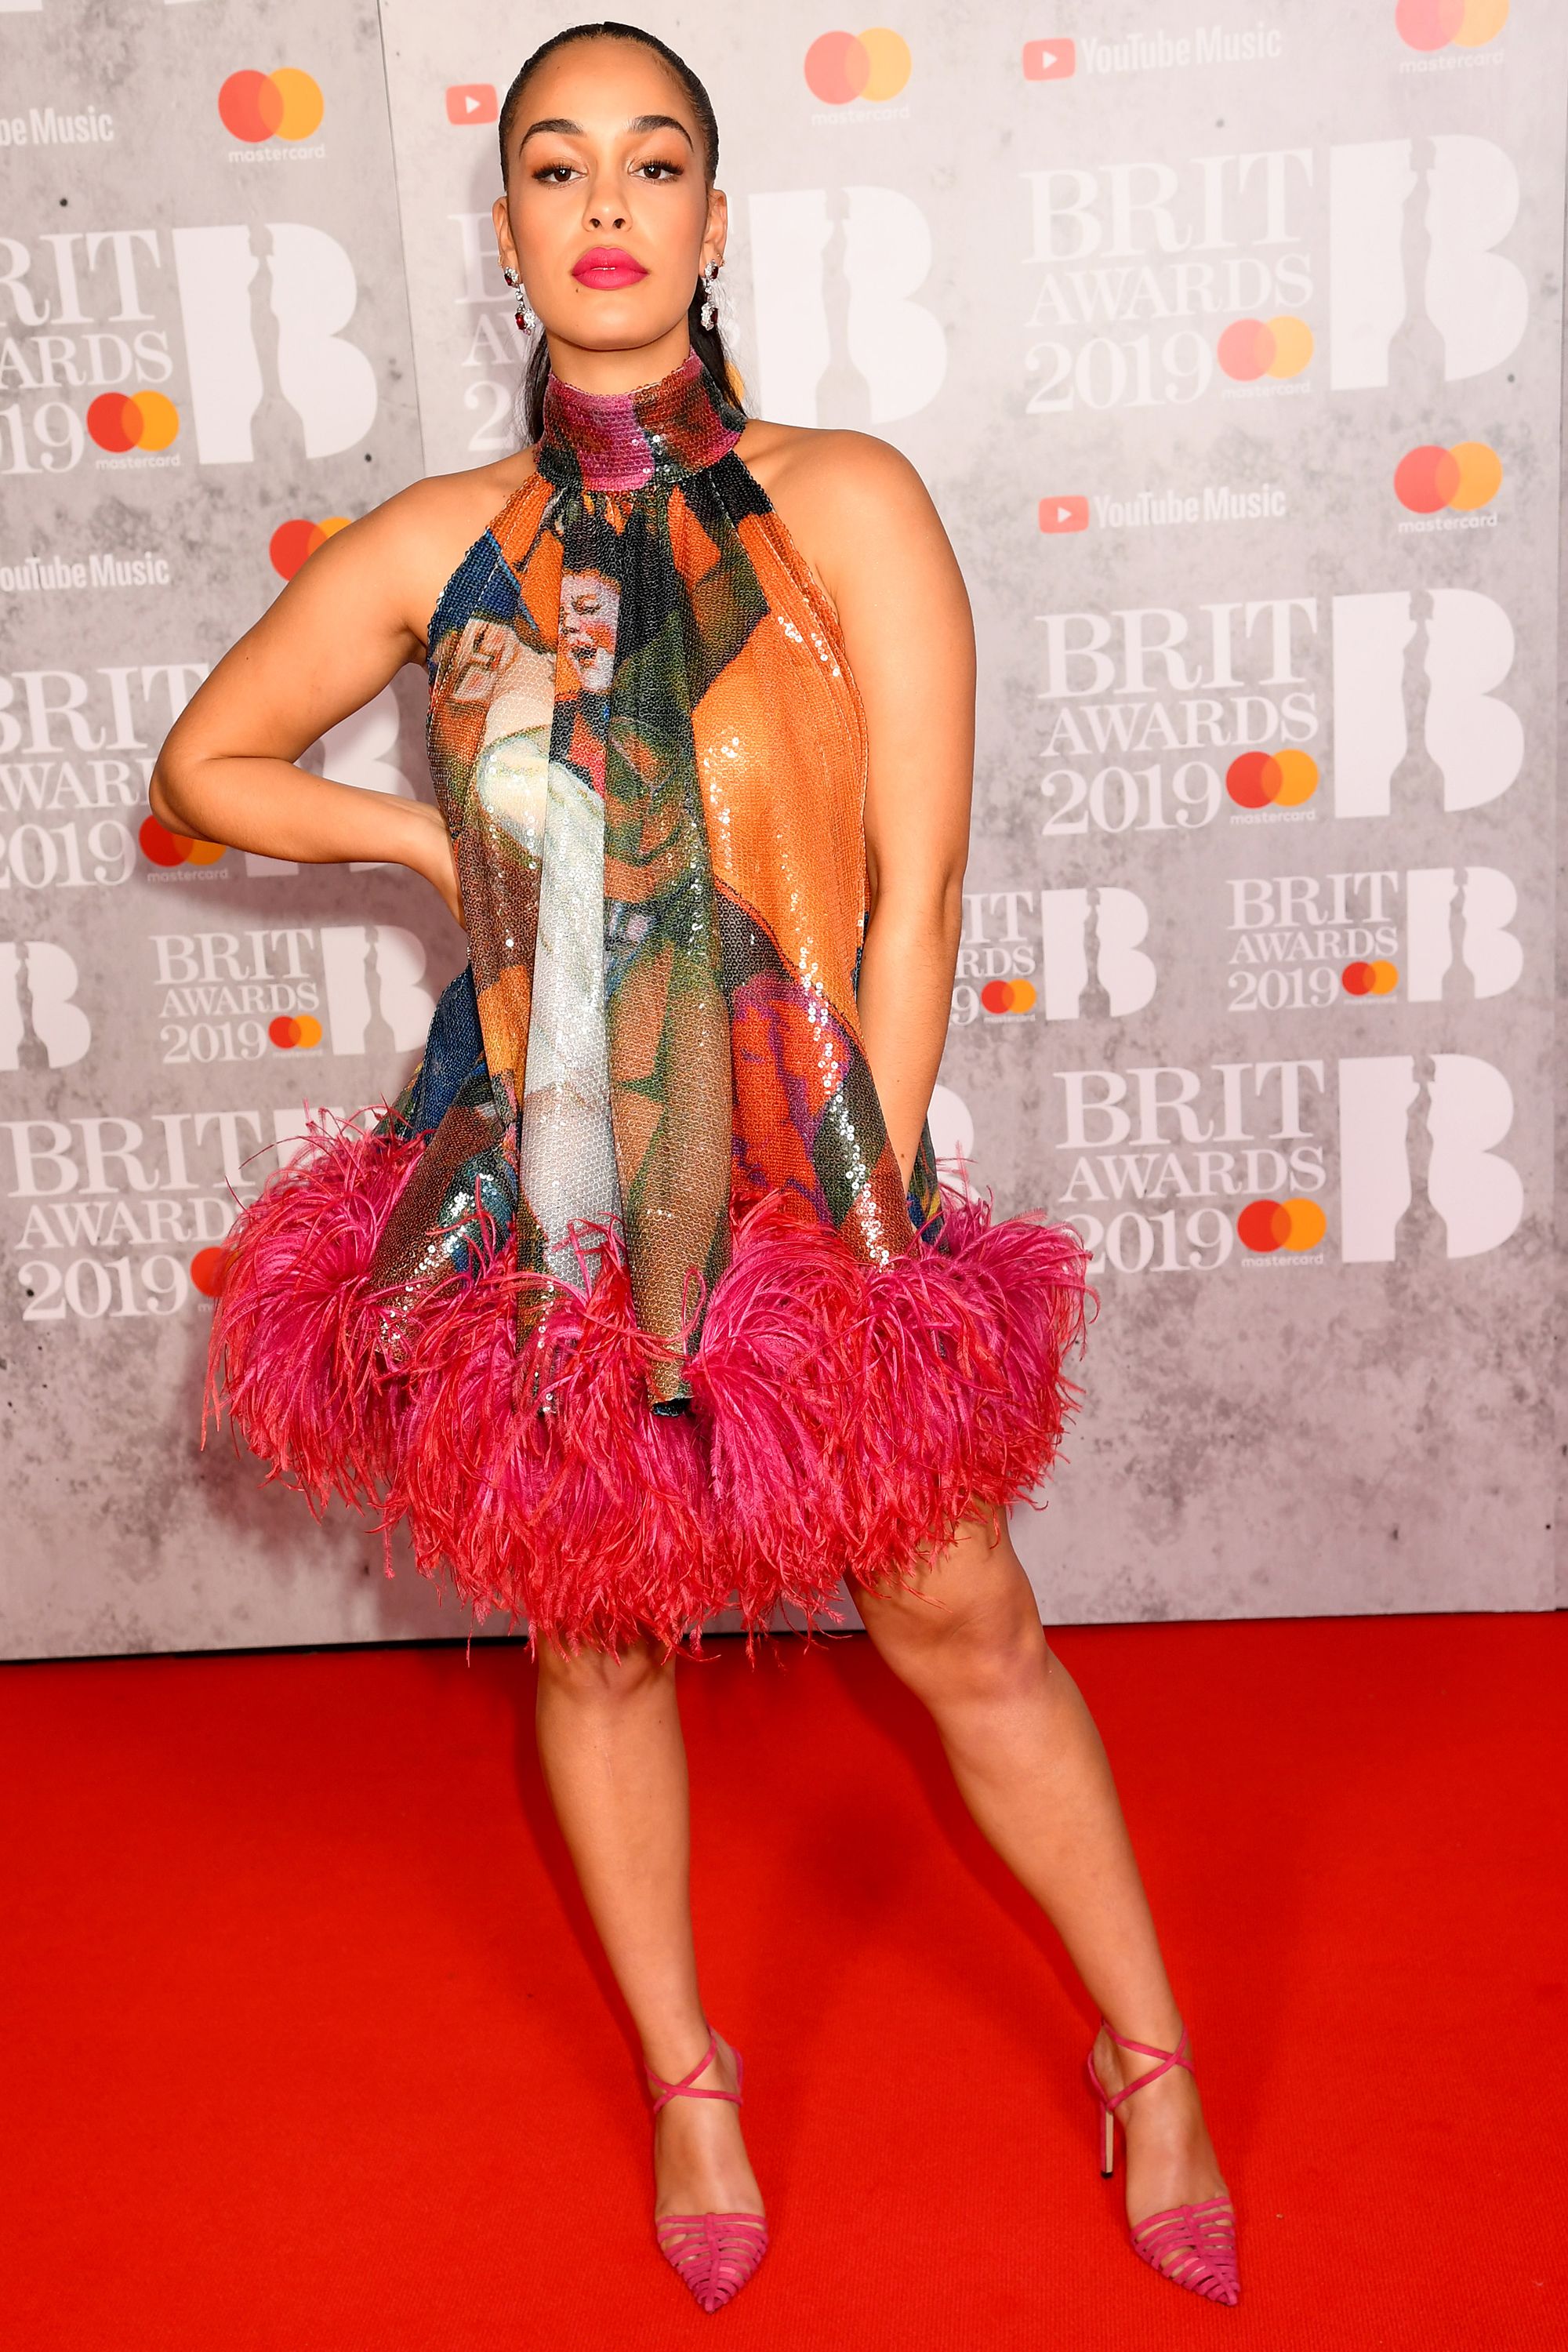 brit awards outfits 2019